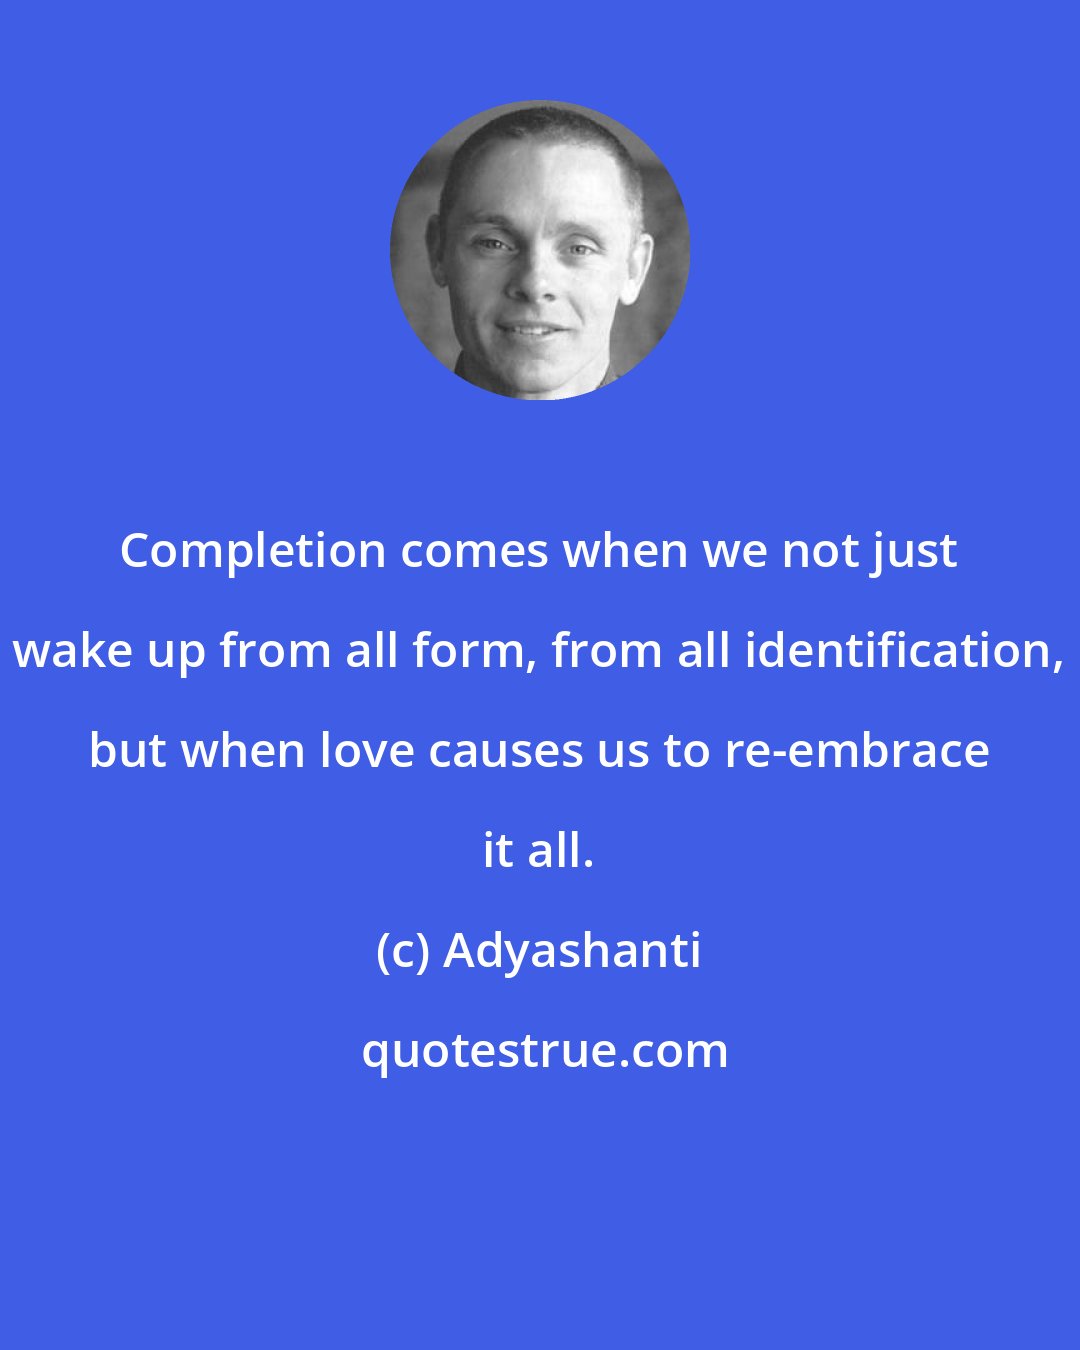 Adyashanti: Completion comes when we not just wake up from all form, from all identification, but when love causes us to re-embrace it all.